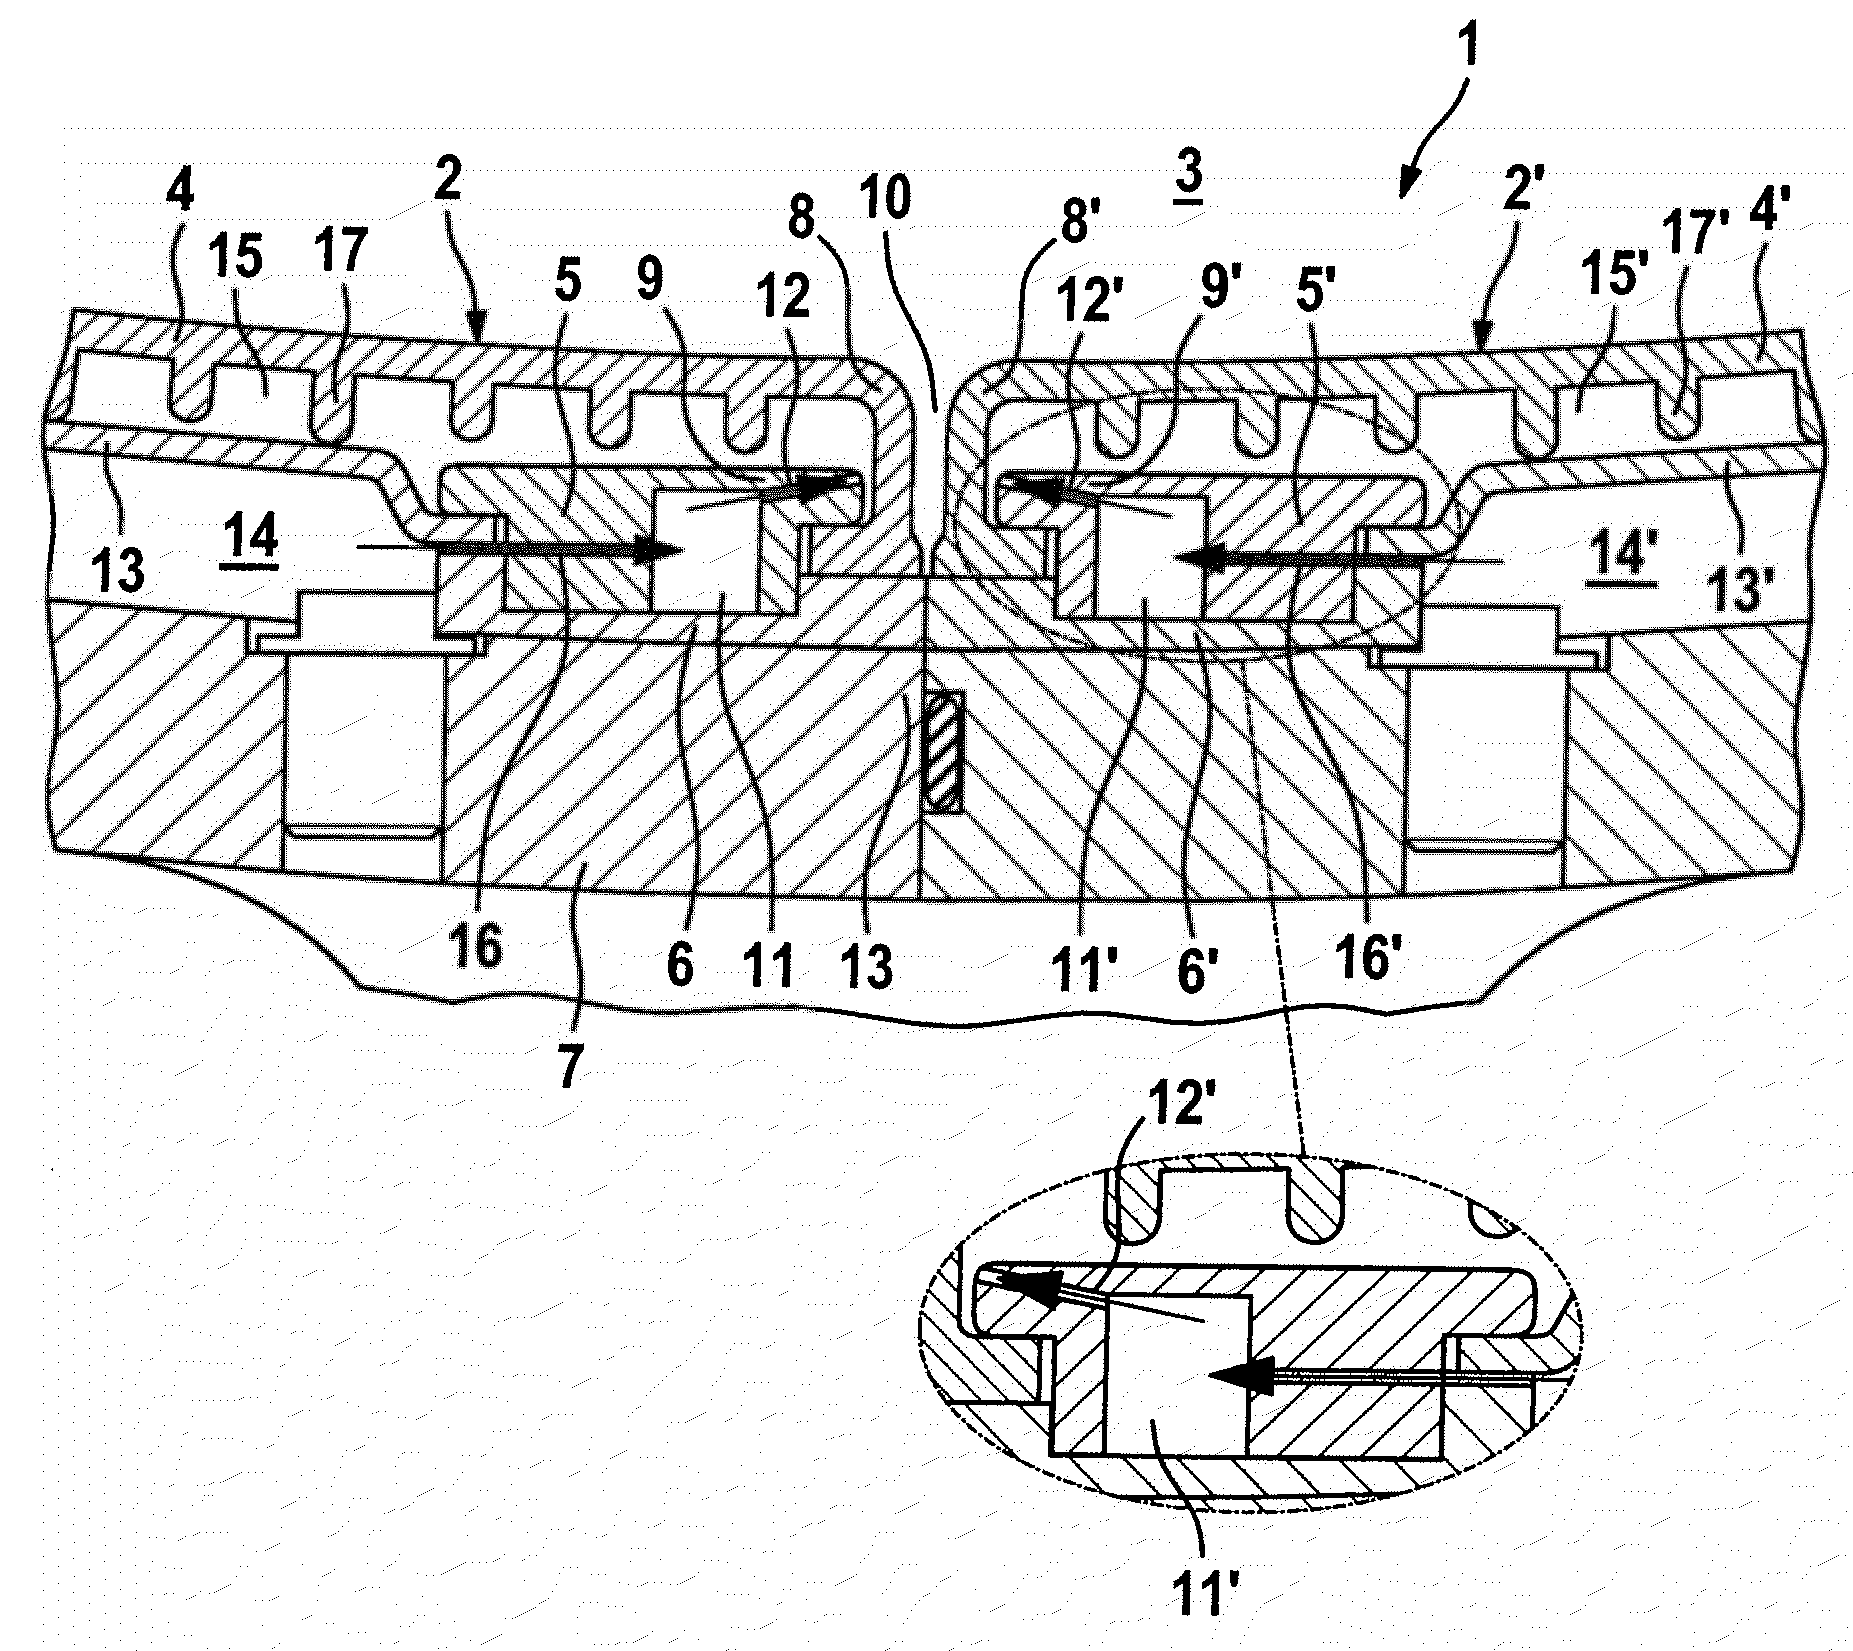 Combustion chamber of a combustion system